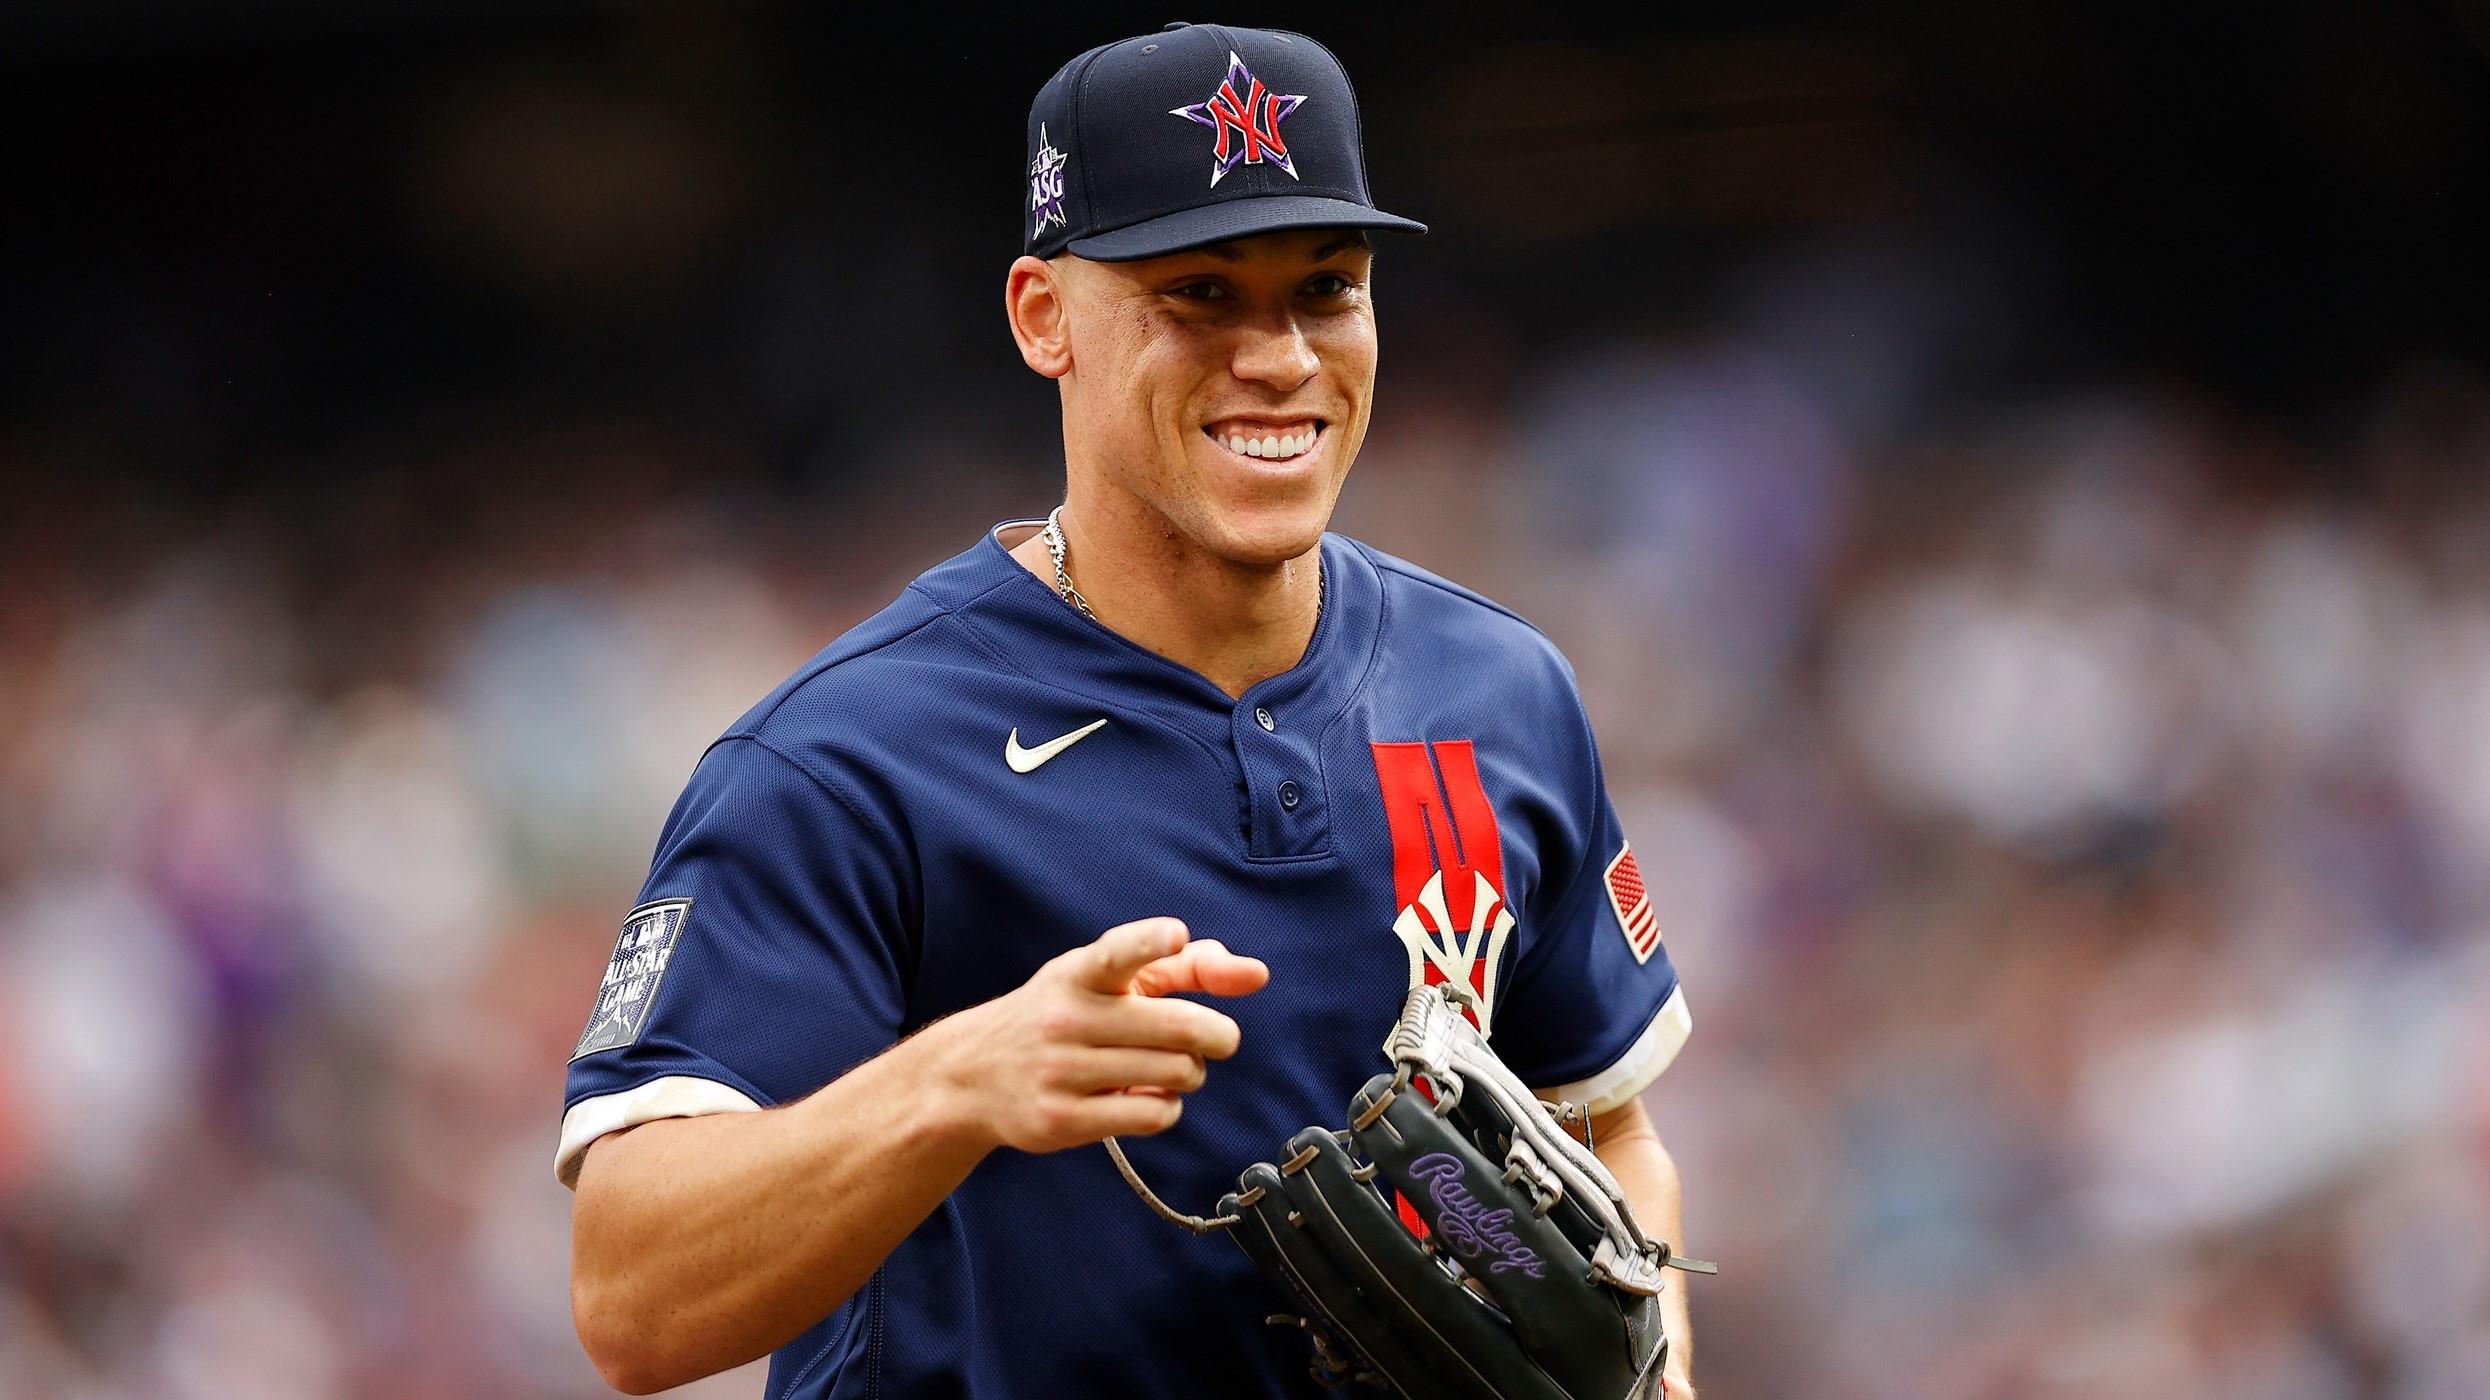 Jul 13, 2021; Denver, Colorado, USA; American League right fielder Aaron Judge of the New York Yankees (99) smiles and points as he runs back to the dugout after the second inning against the National League during the 2021 MLB All Star Game at Coors Field. / Isaiah J. Downing-USA TODAY Sports